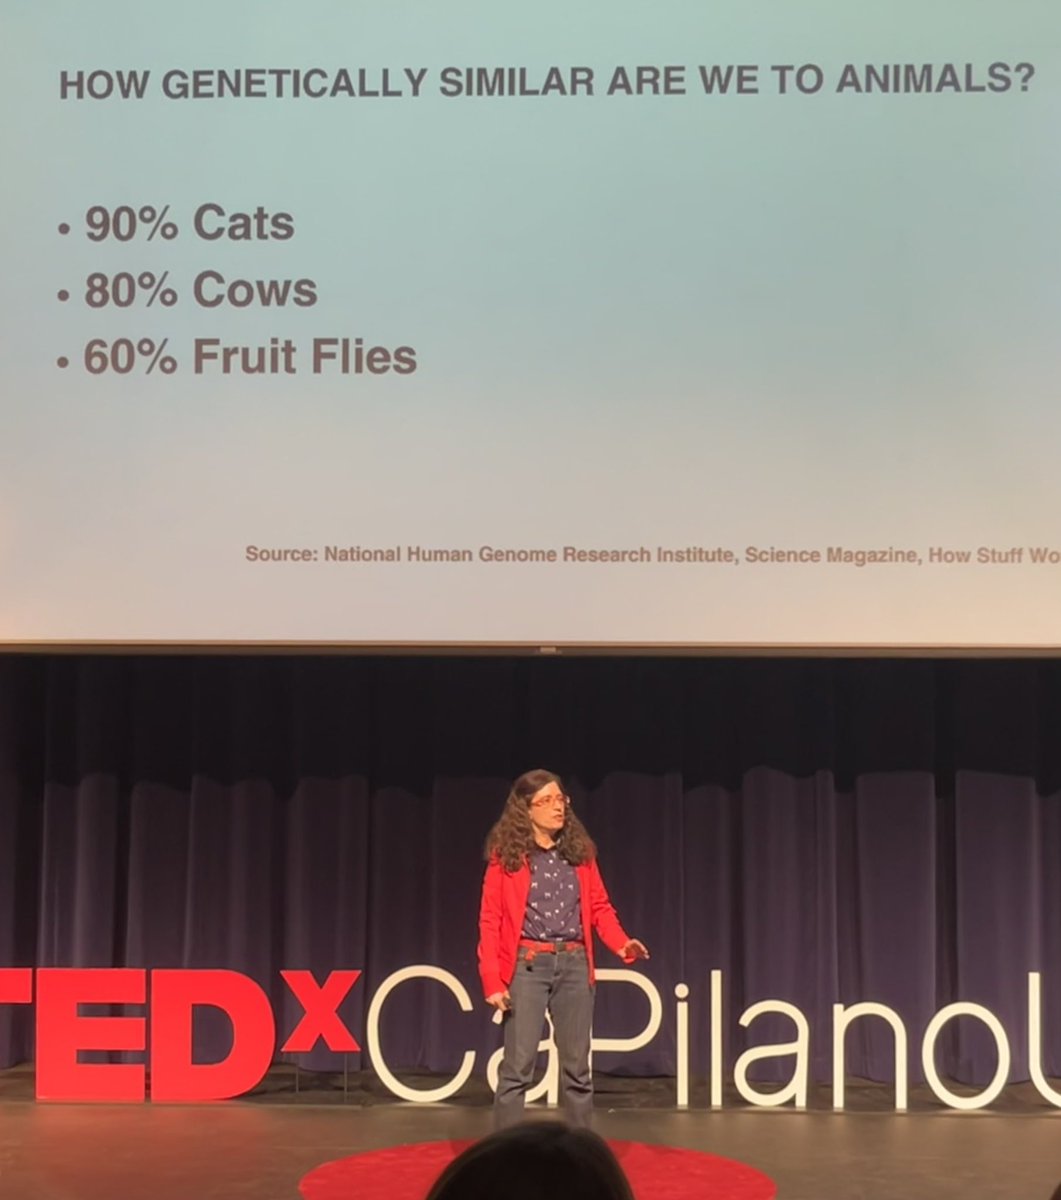 How genetically similar are we to animals? asks our School of Legal Studies instructor @shroffanimallaw at tonight’s enlightening @Tedx @CapilanoU  ted.com/tedx/events/53… #tedxcapilanou #coexistence #animalsaresentient